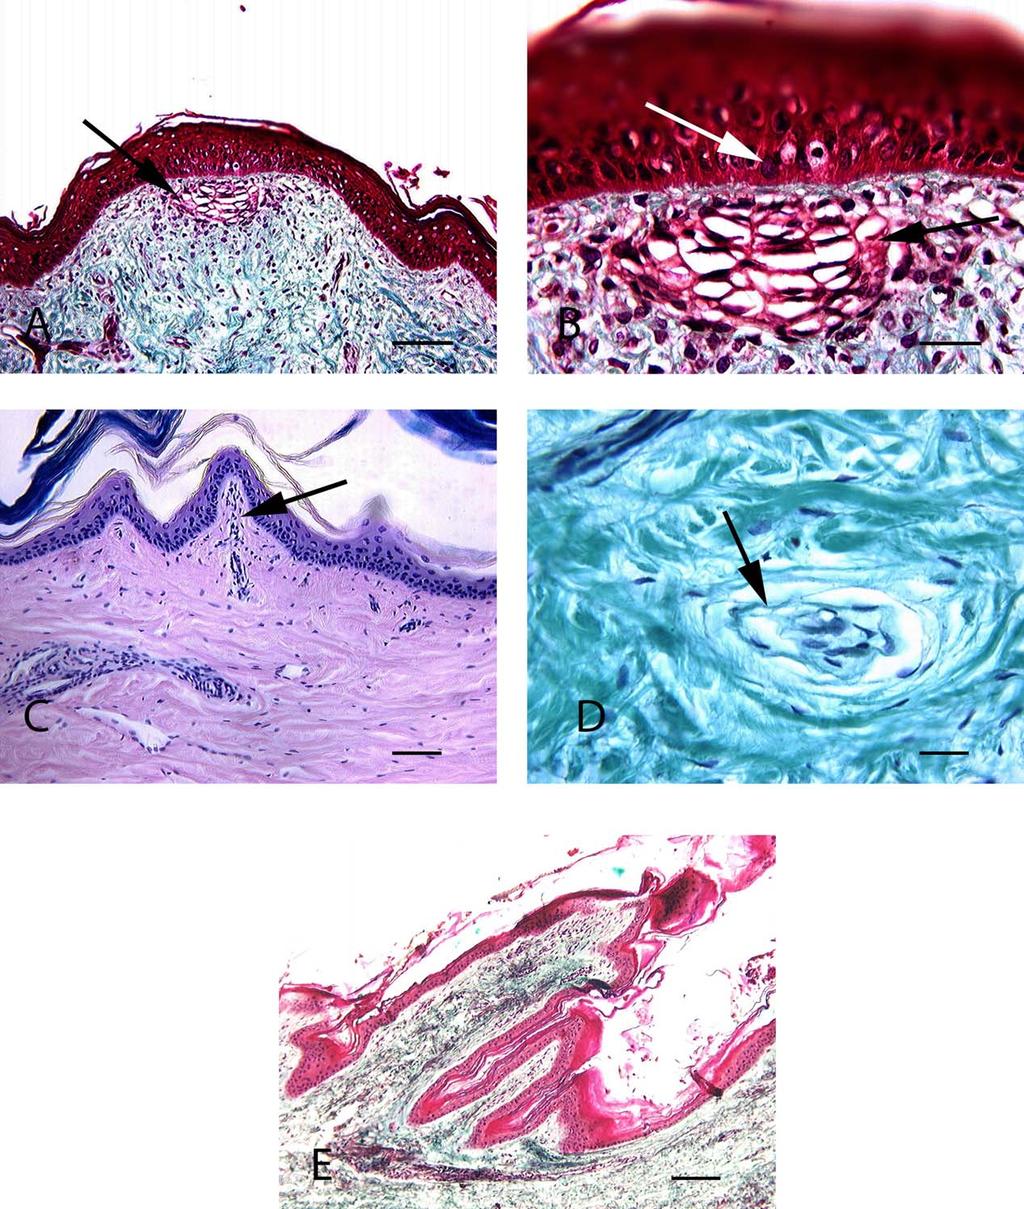 ALLIGATOR ORAL CAVITY STRUCTURE 1317 Fig. 4. Histological sections of the subadult alligator oral cavity.